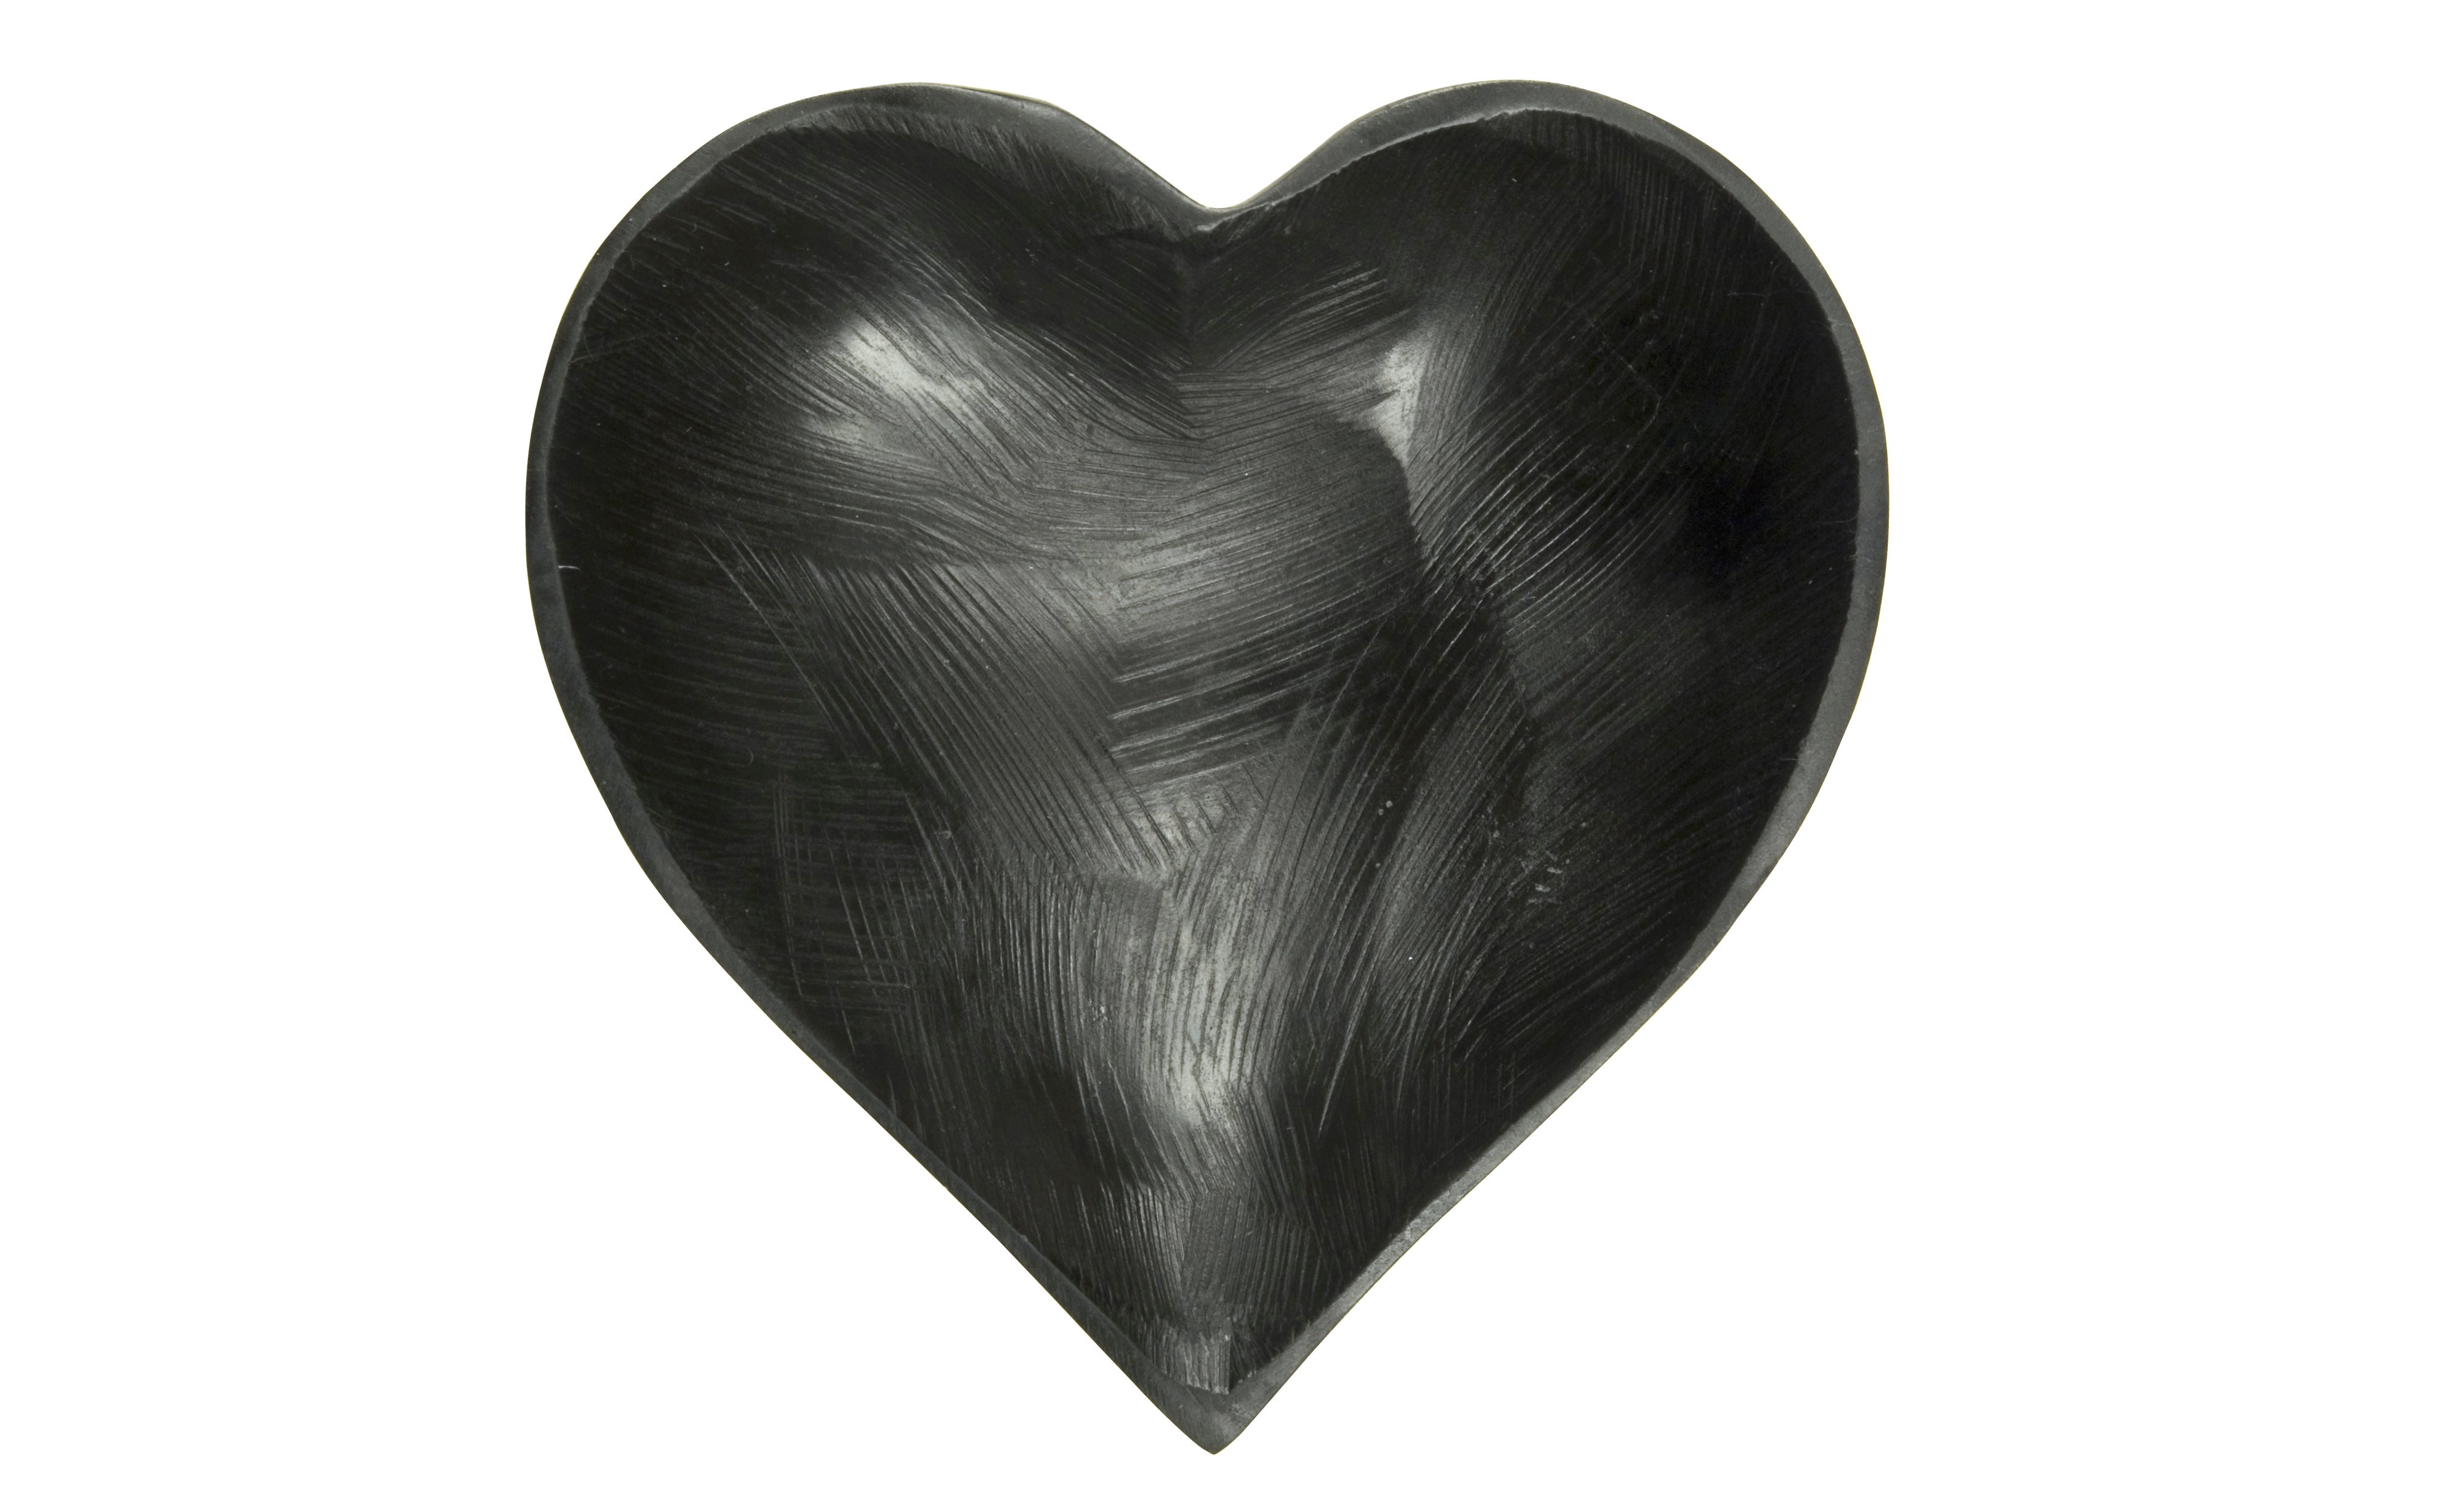 Black Heart: The Symbol of Love, Strength, and Resilience